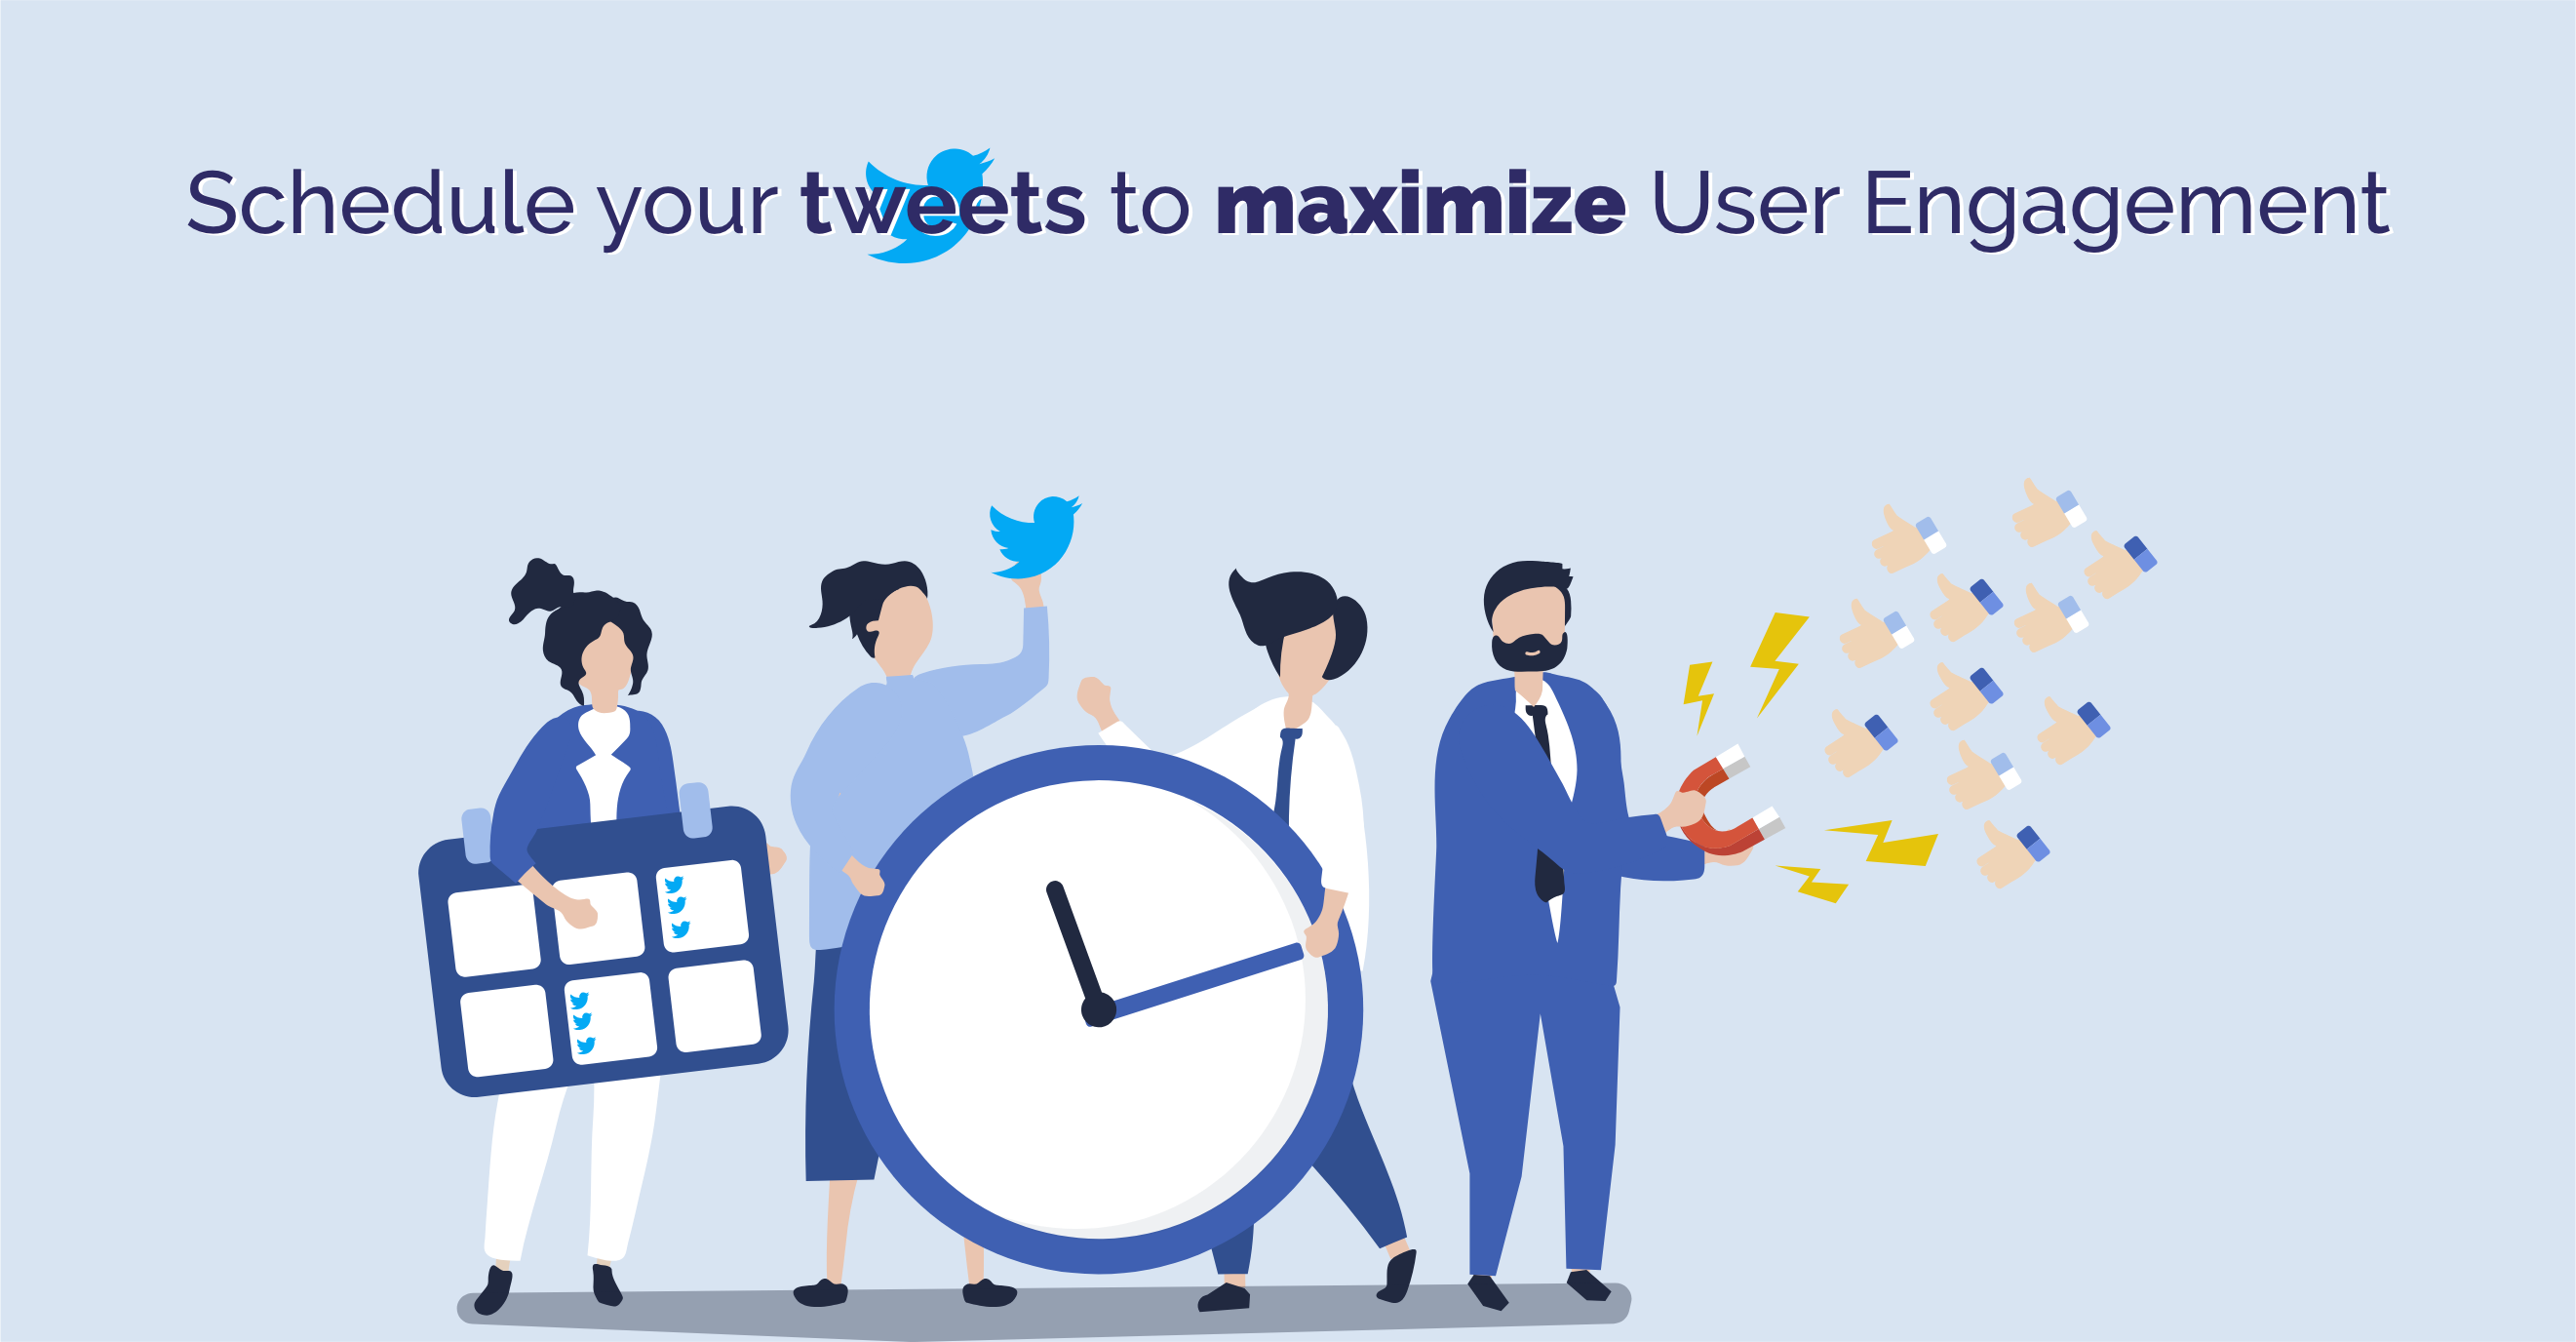 Schedule your tweets to maximize User Engagement